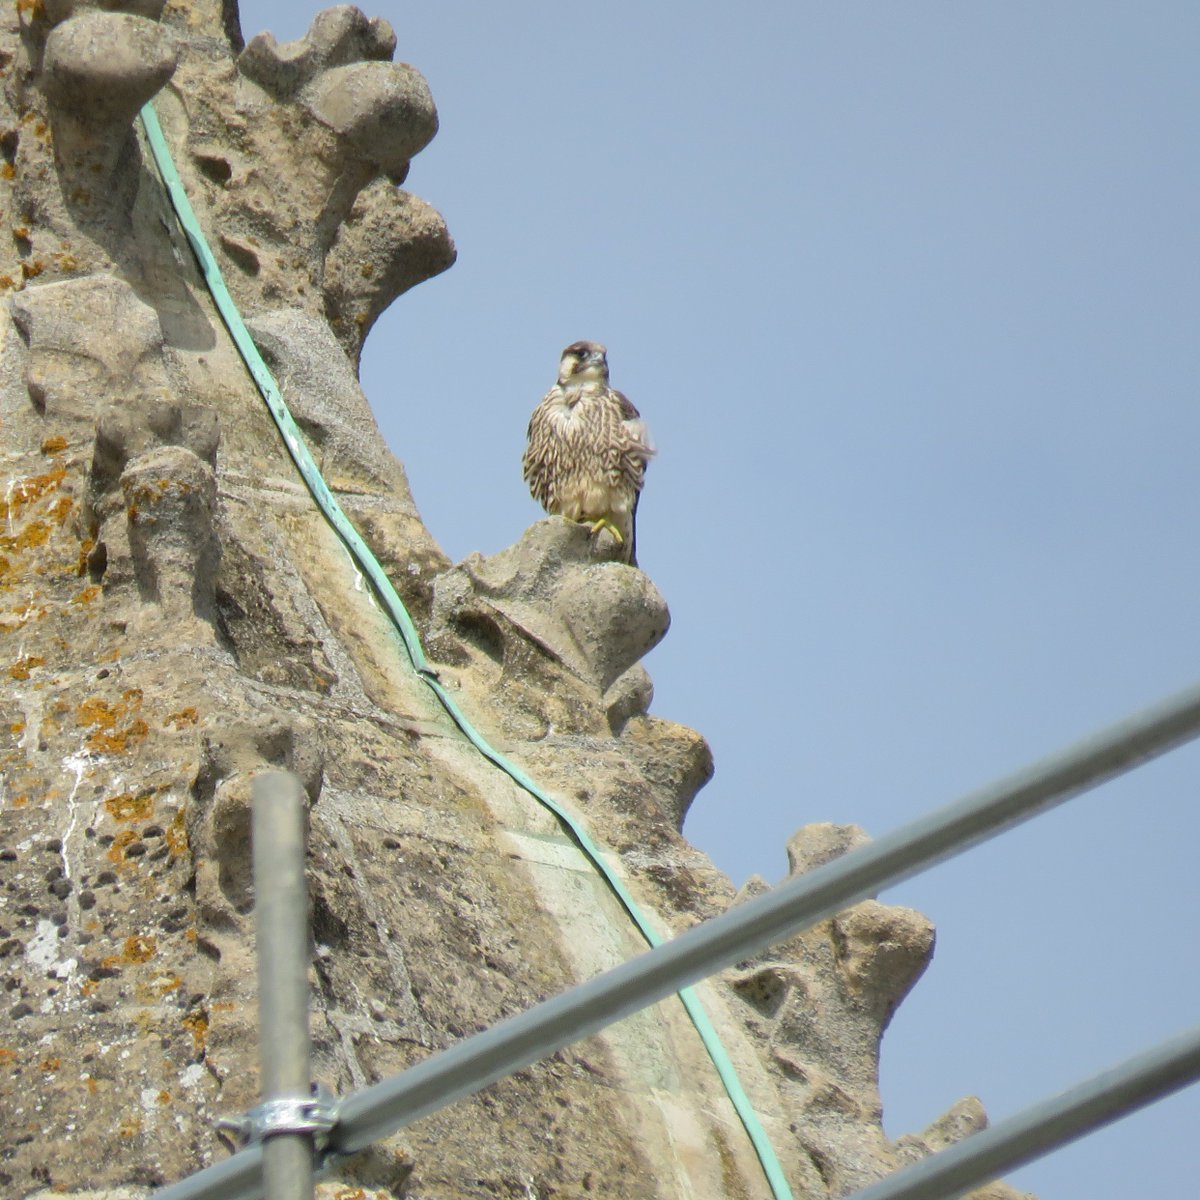 The adult House Martins are busy feeding their chicks on Mayflies and other insects in the King's college porters lodge. Juvenile peregrine also on a chapel spire.